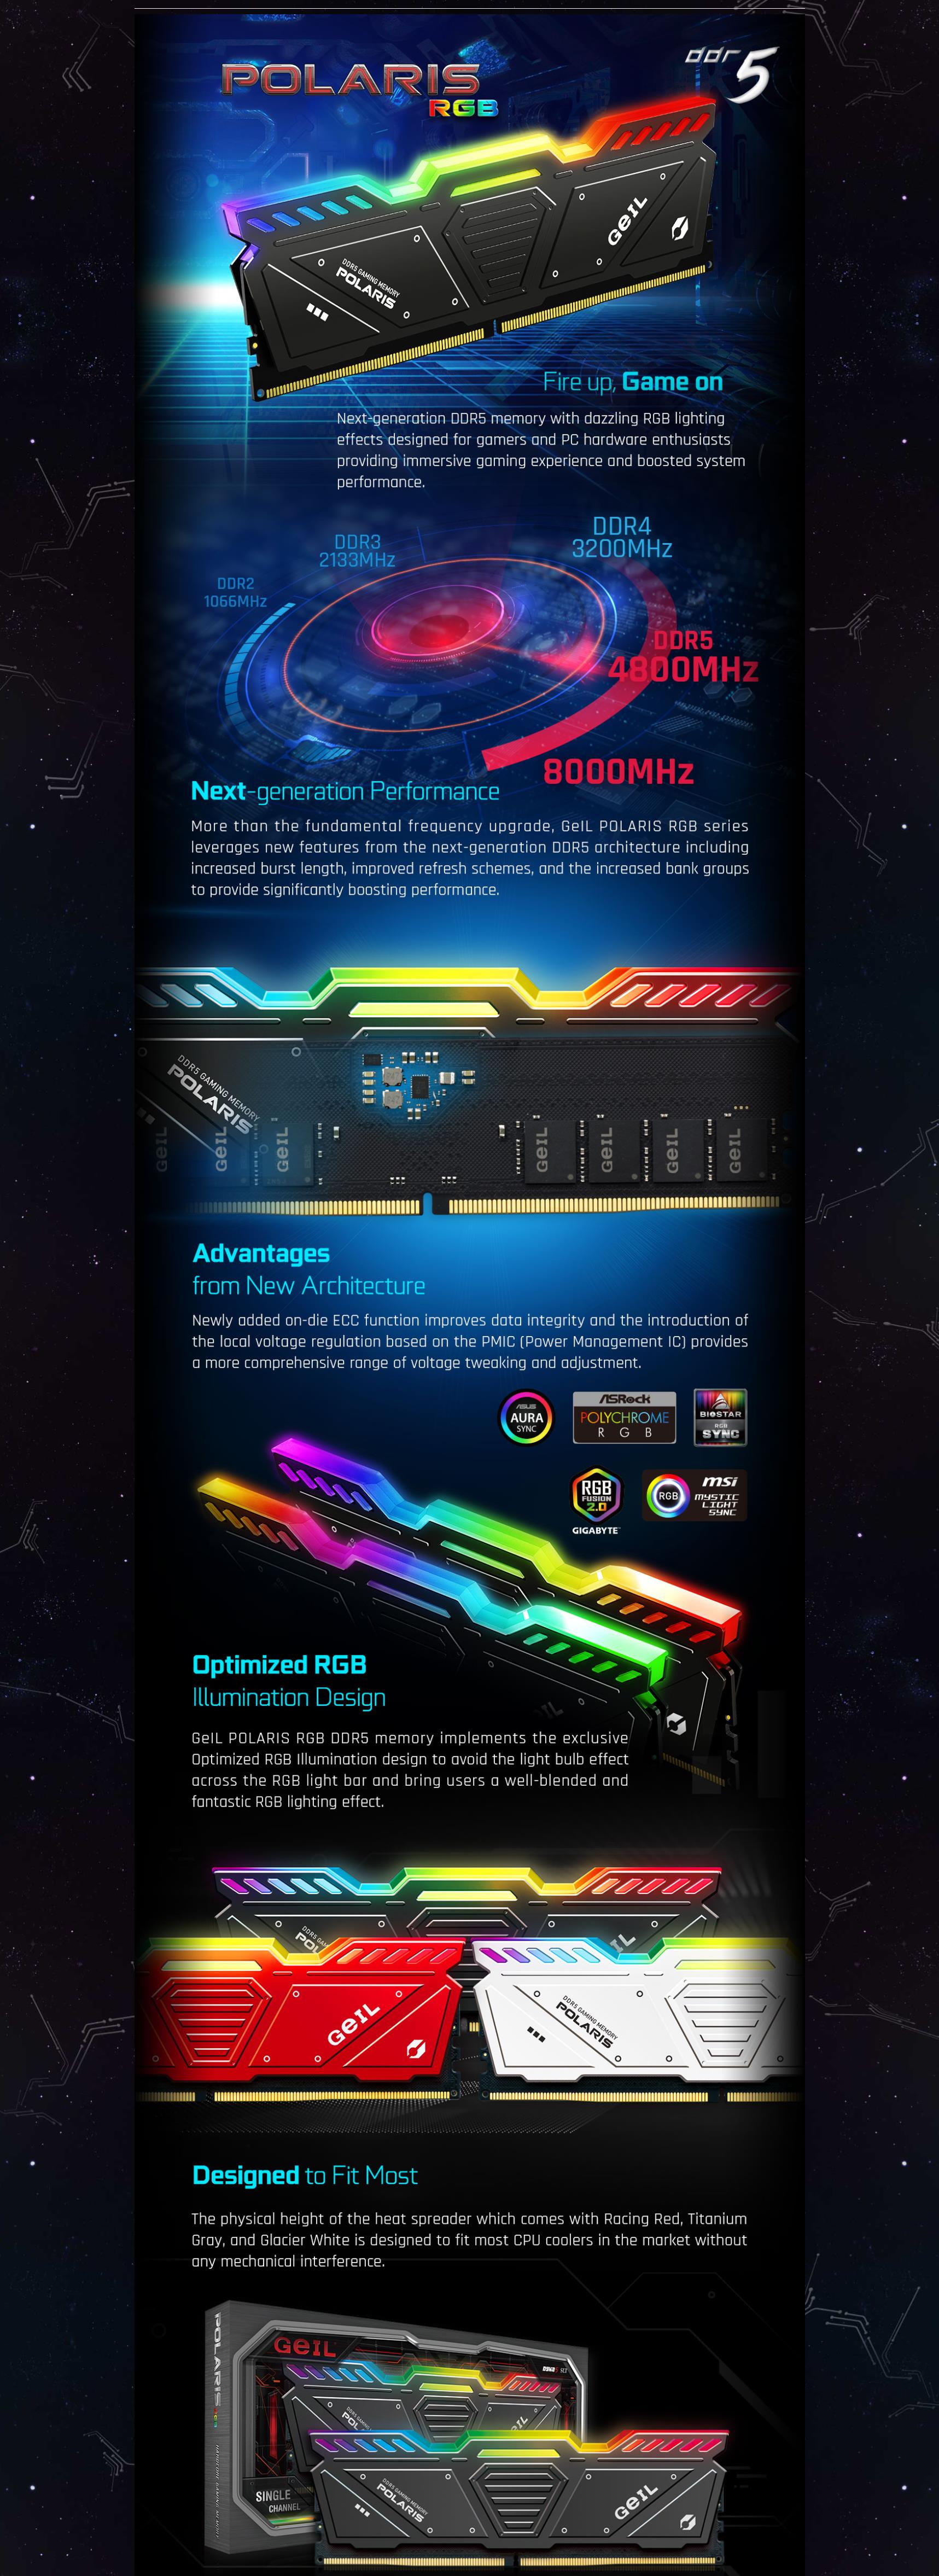 A large marketing image providing additional information about the product GeIL 32GB Kit (2x16GB) DDR5 Polaris RGB C36 7200MHz - Grey - Additional alt info not provided